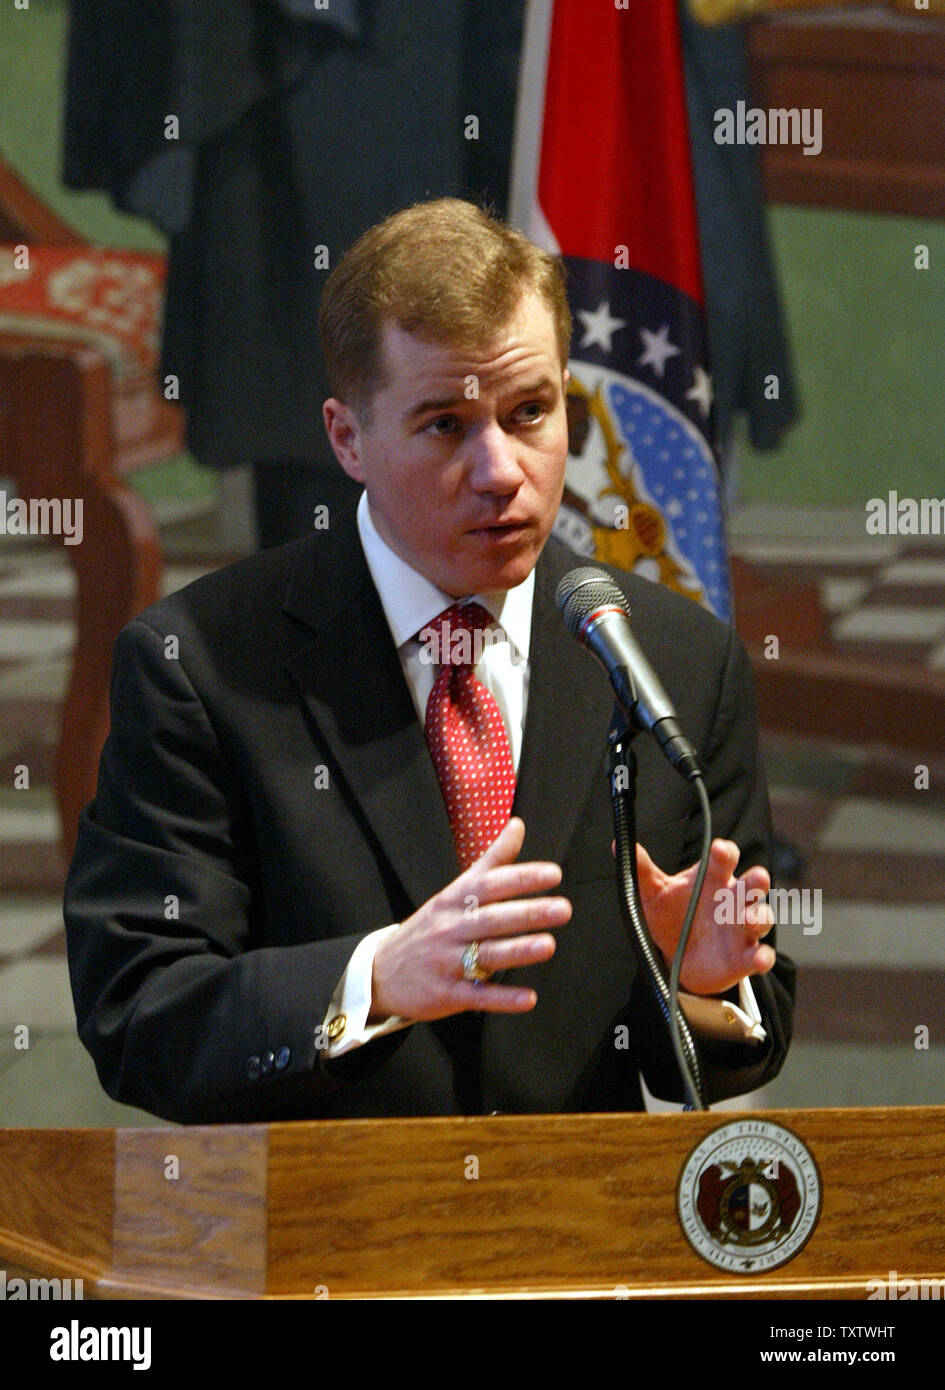 Mo. Gov. Matt Blunt speaks to reporters on his first full day at work in the State Capitol in Jefferson City, Mo on January 11, 2005. Blunt announced the revocation of former Gov. Bob Holden's executive order which sanctioned collective bargaining for state agencies which sought to allow service unions to take money out of the paychecks of state workers. Blunt also announced cost-cutting measures like the closing of the state's Washington, D.C. office, a freeze on the purchase of non-emergency vehicles, cell phones and the purchase and leasing of new office space for state agencies. (UPI Photo Stock Photo